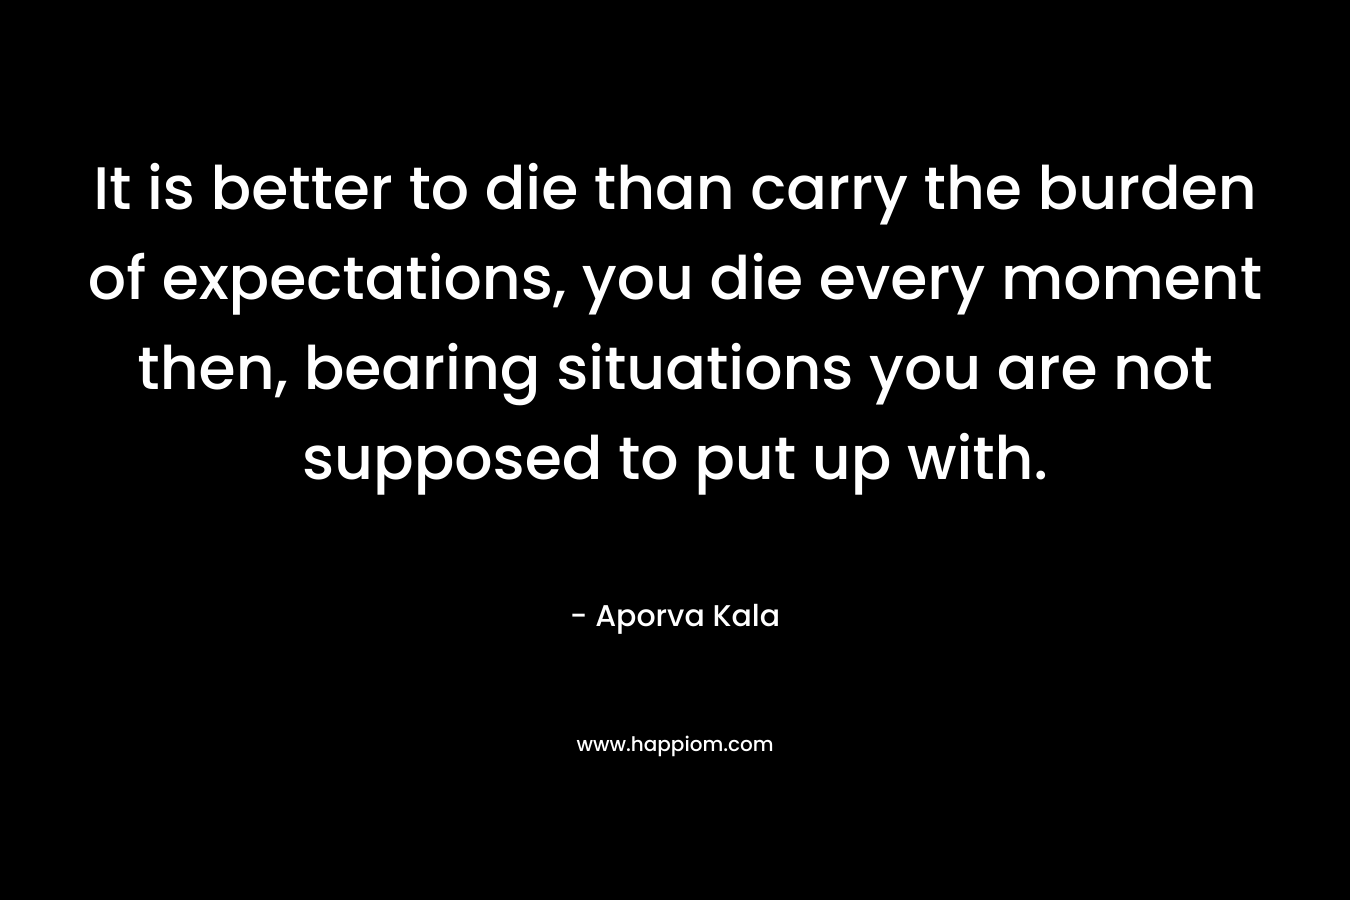 It is better to die than carry the burden of expectations, you die every moment then, bearing situations you are not supposed to put up with. – Aporva Kala